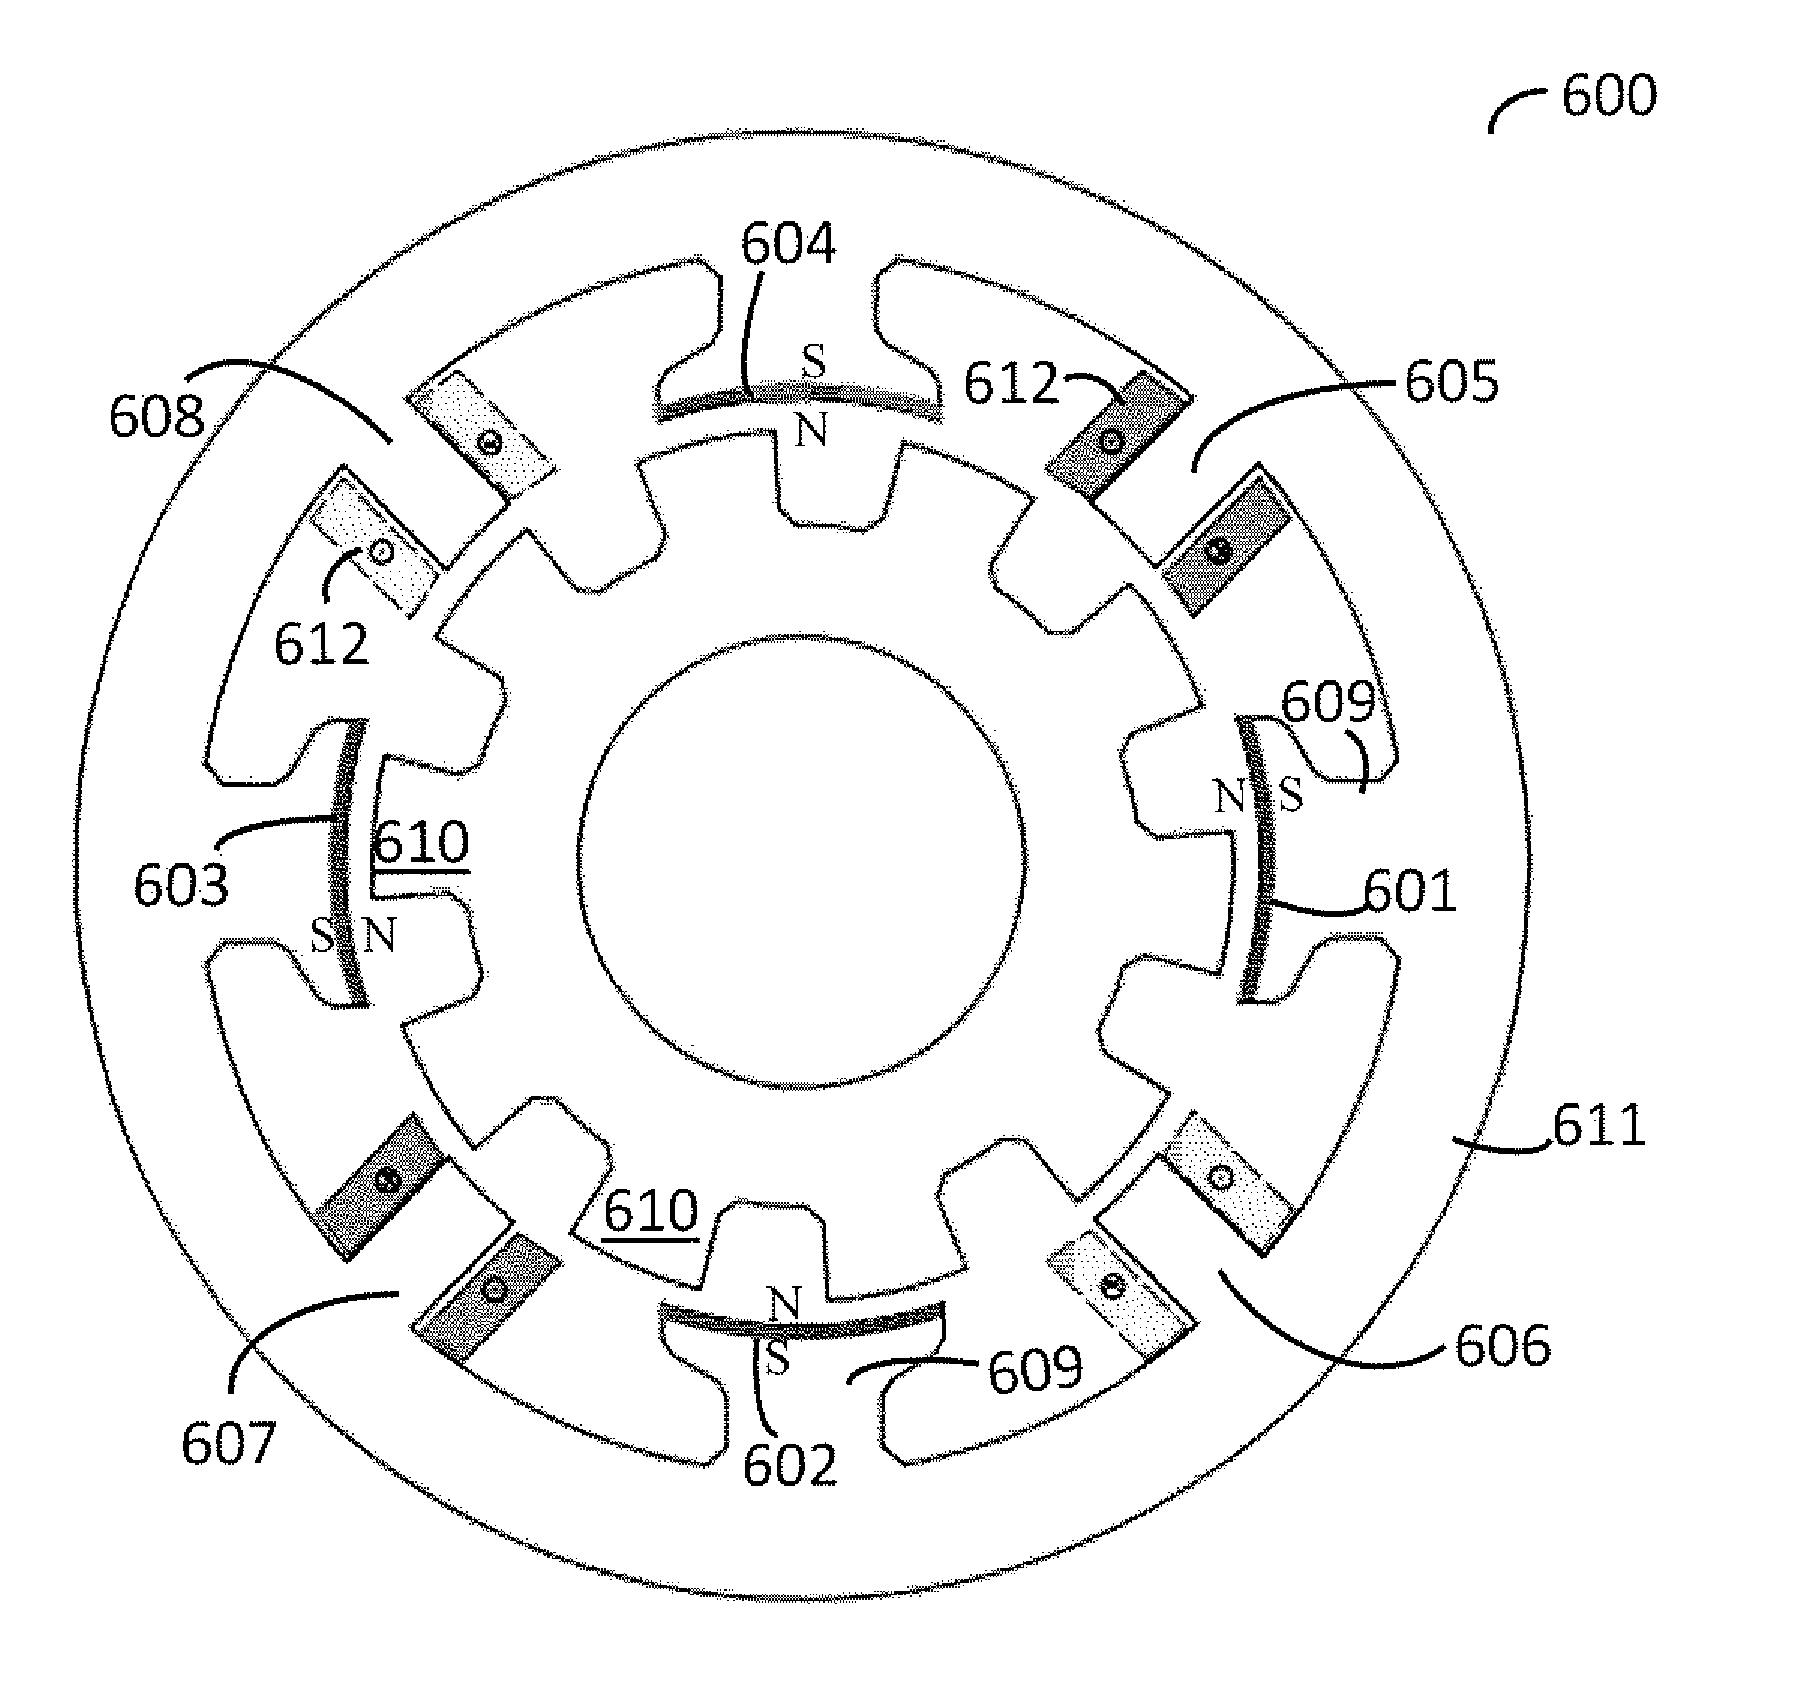 High power density switched reluctance machines with hybrid excitation